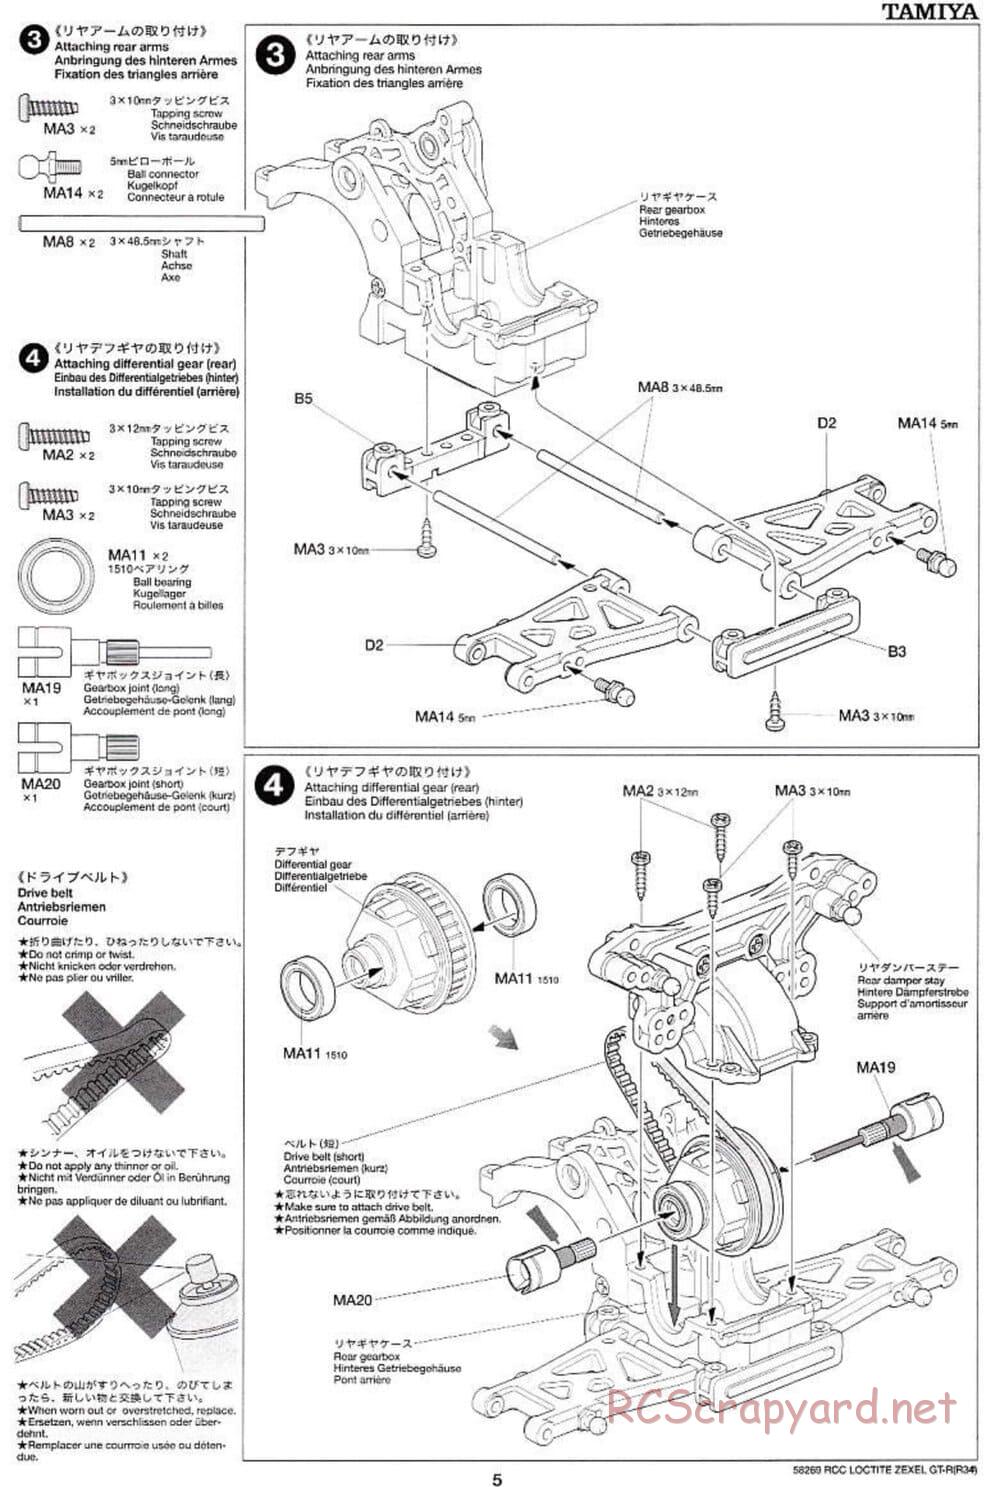 Tamiya - Loctite Zexel Skyline GT-R (R34) - TA-04 Chassis - Manual - Page 5